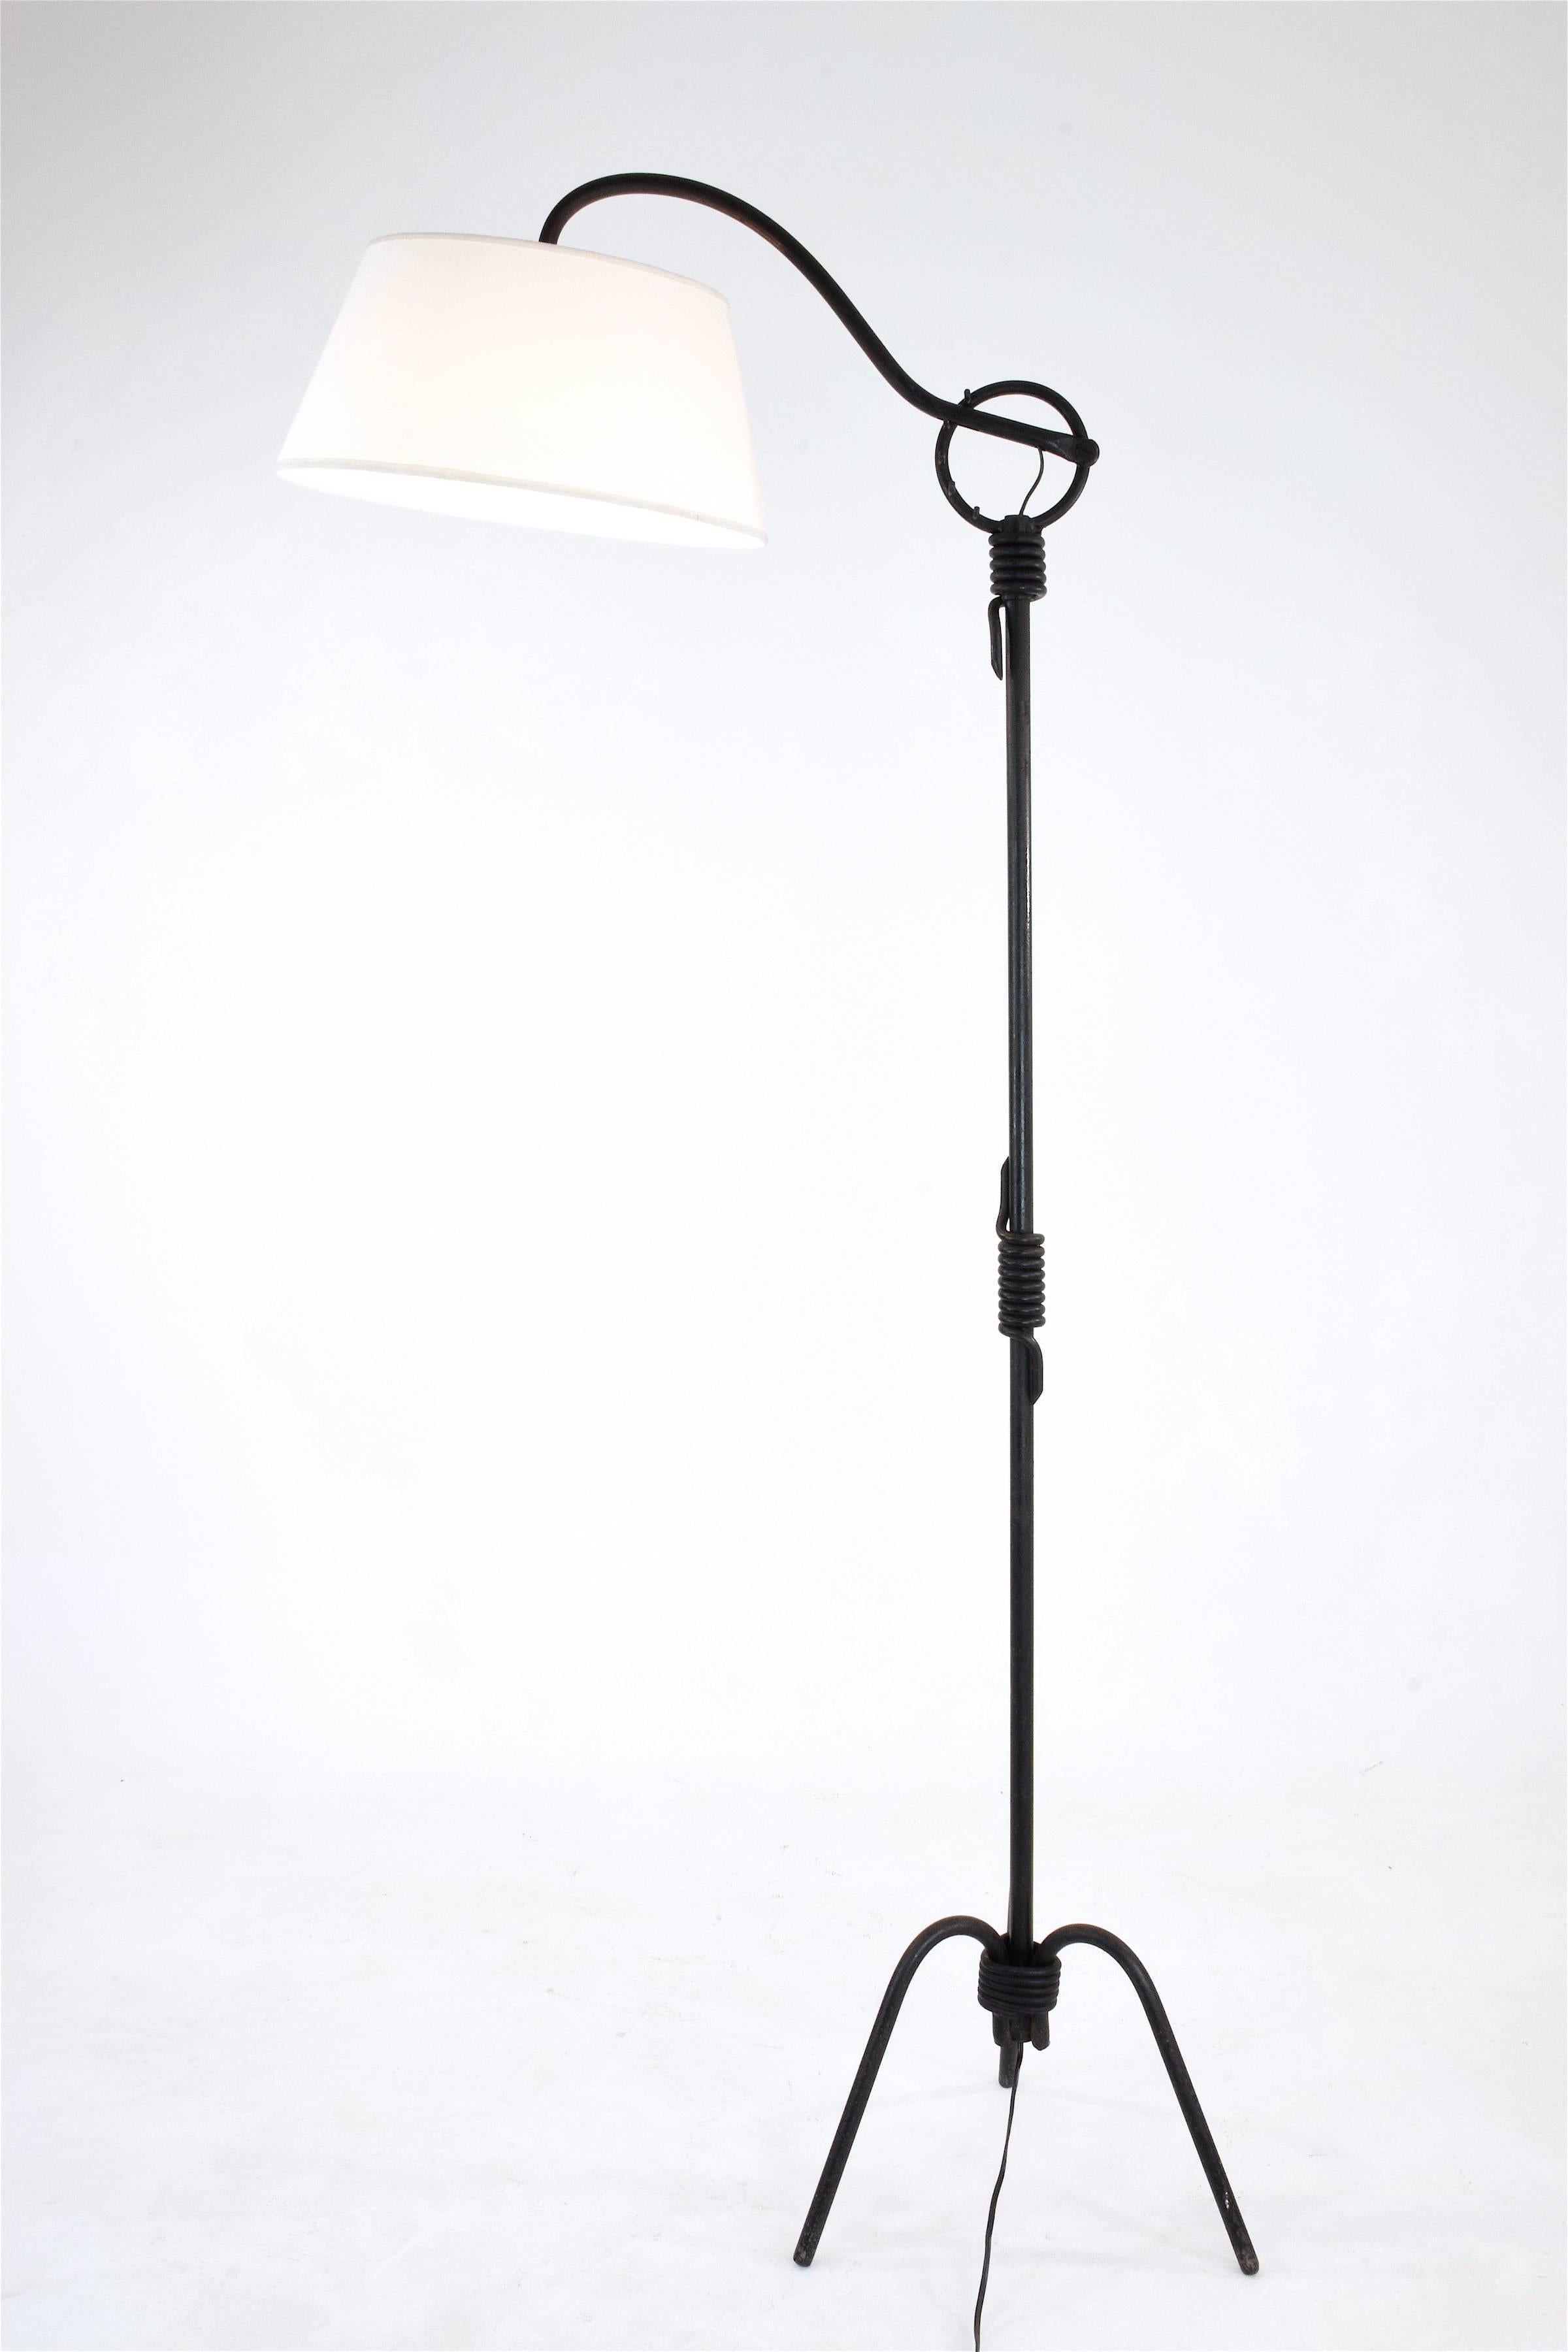 Historic 20th century vintage floor lamp by Jean Royère, France, circa 1940s composed of a wrought iron tripod base with beautiful patina and an adjustable lighting system. 

It has a new lampshade which matches its original style. 

Adjustable